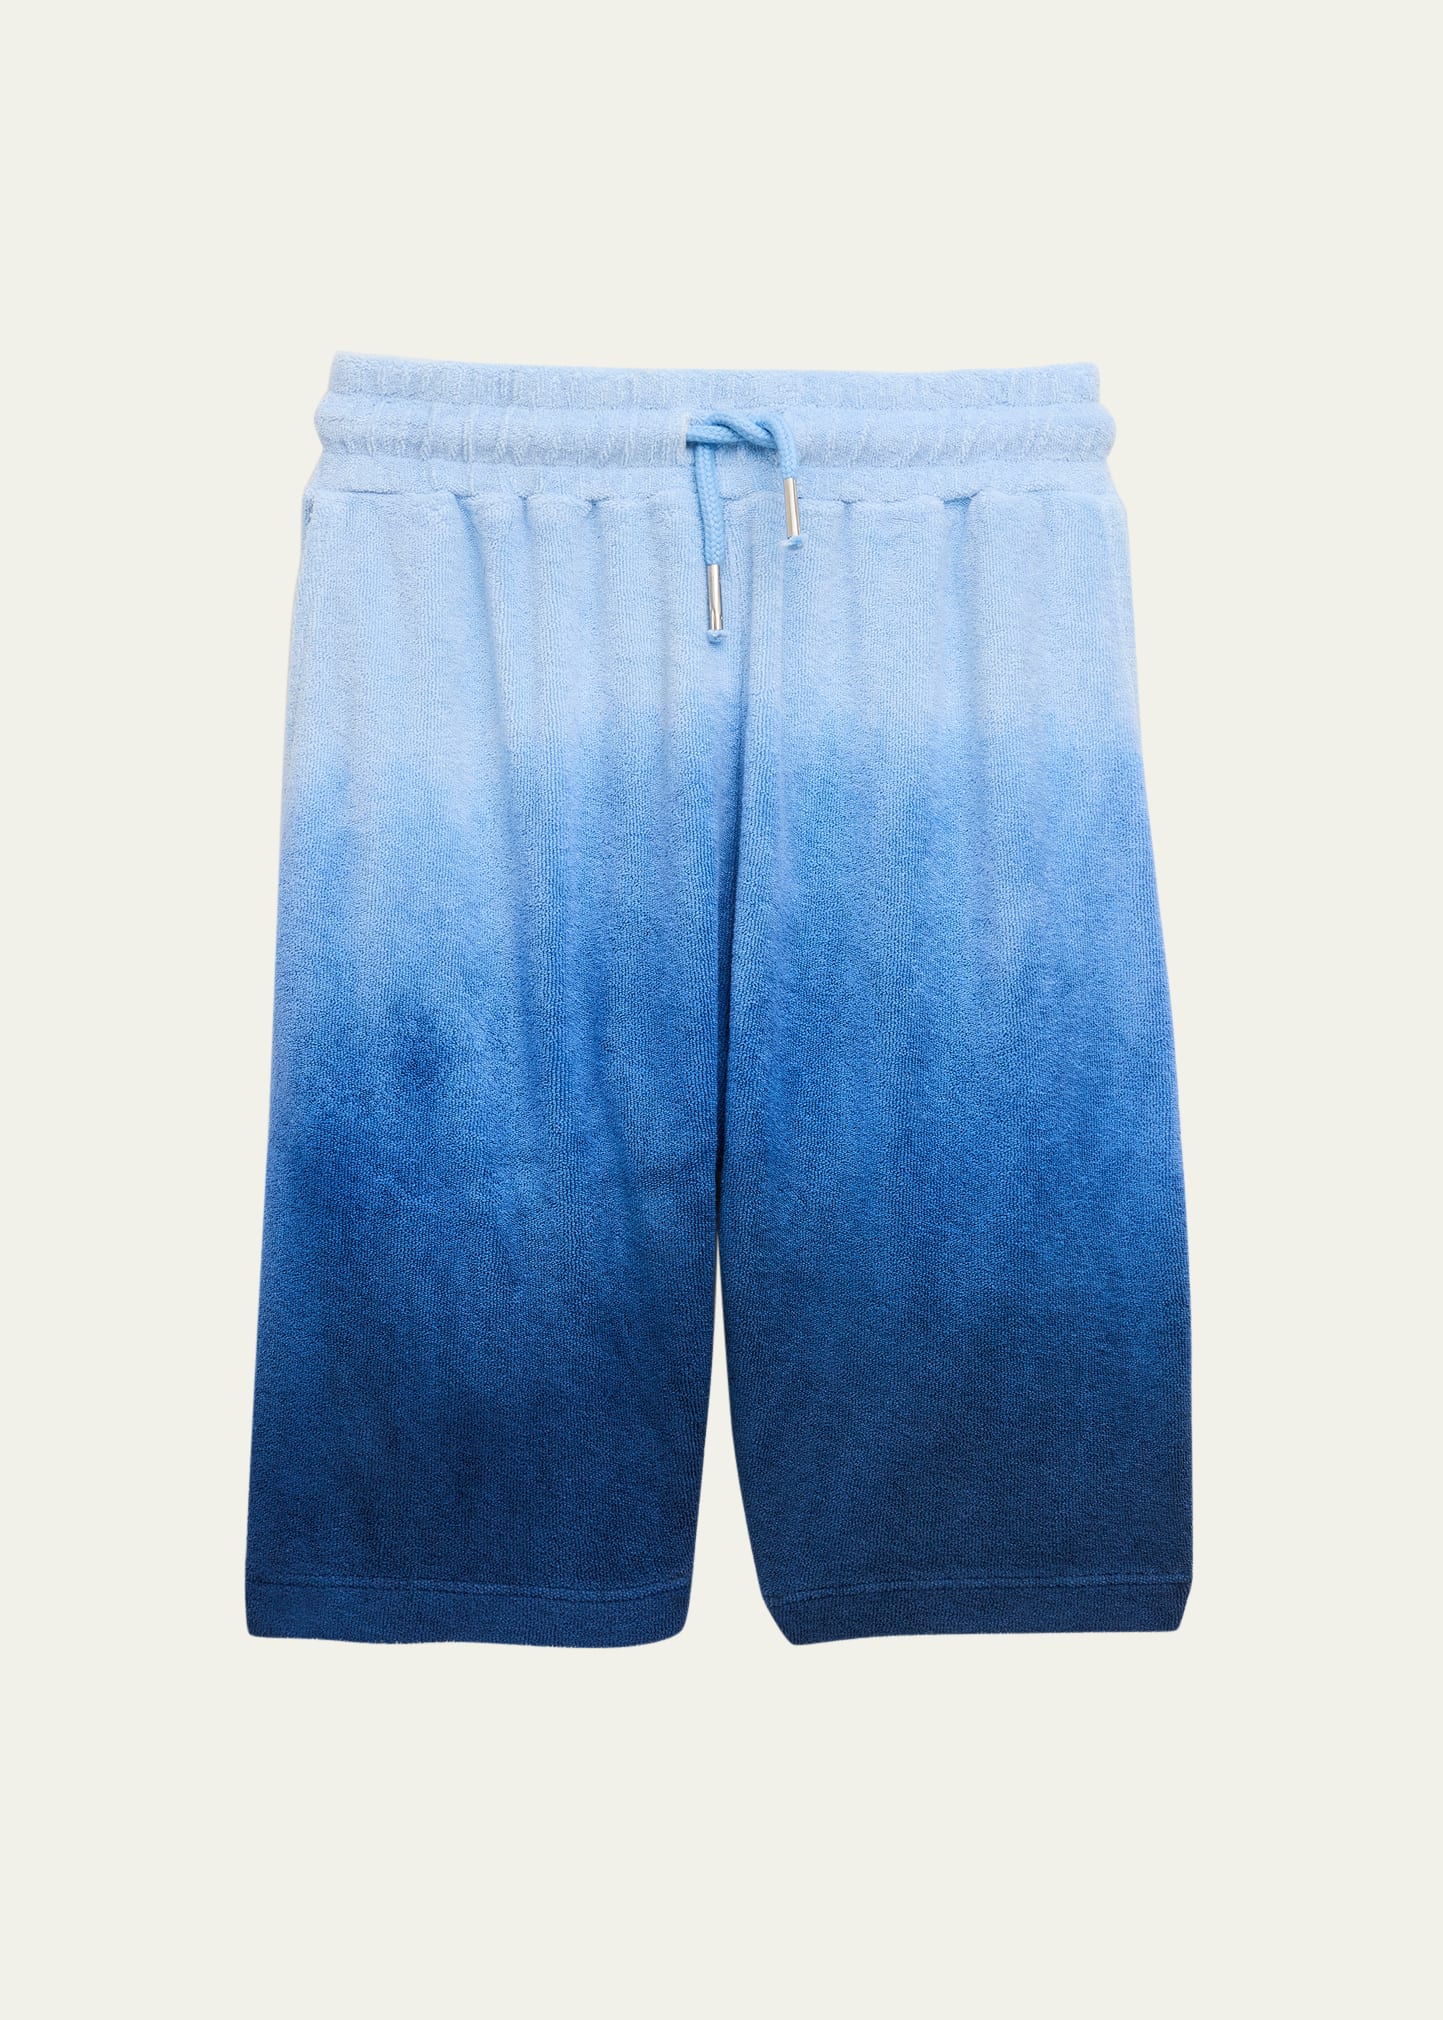 Boy's Abay Ombre Textured Shorts, Size 8-16